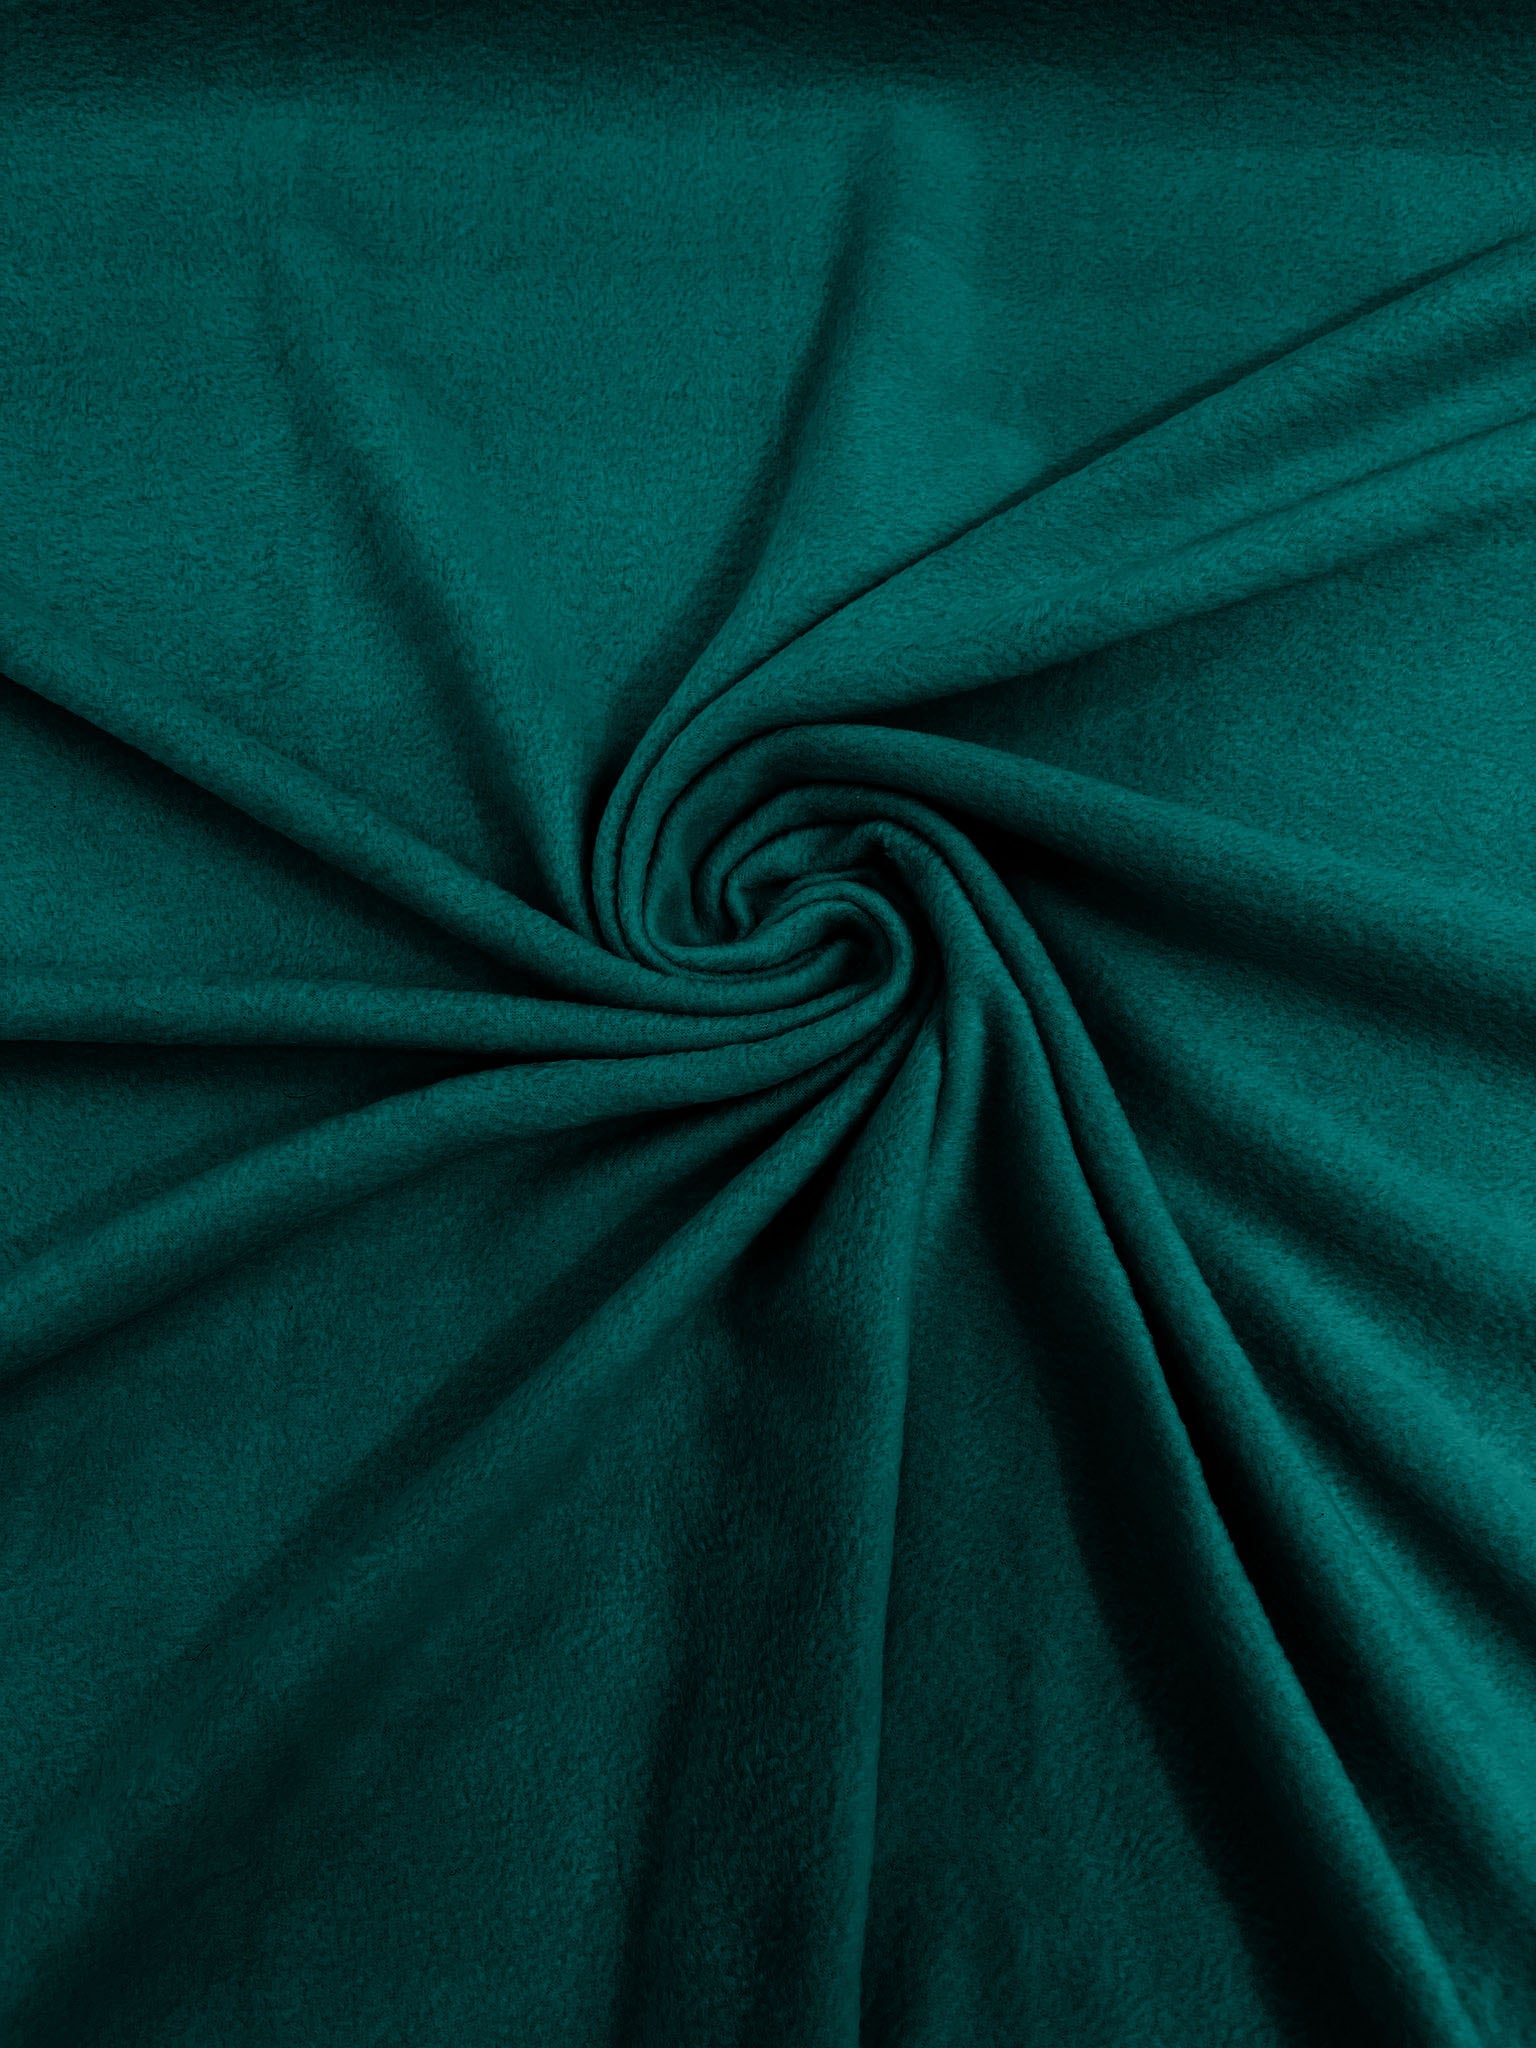 Teal Solid Polar Fleece Fabric Anti-Pill 58" Wide Sold by The Yard